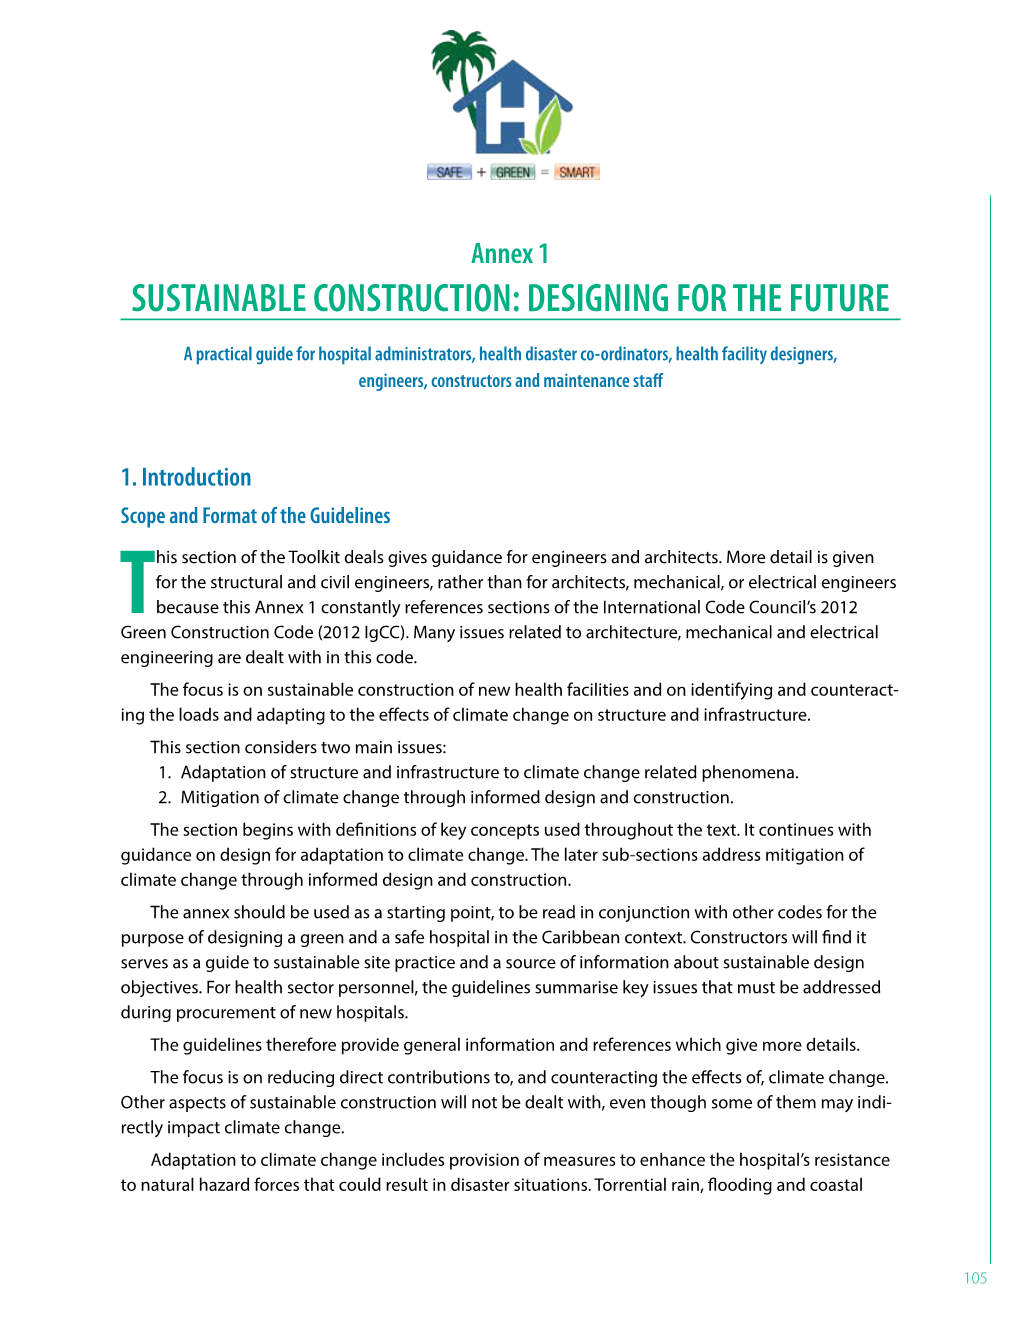 Sustainable Construction: Designing for the Future